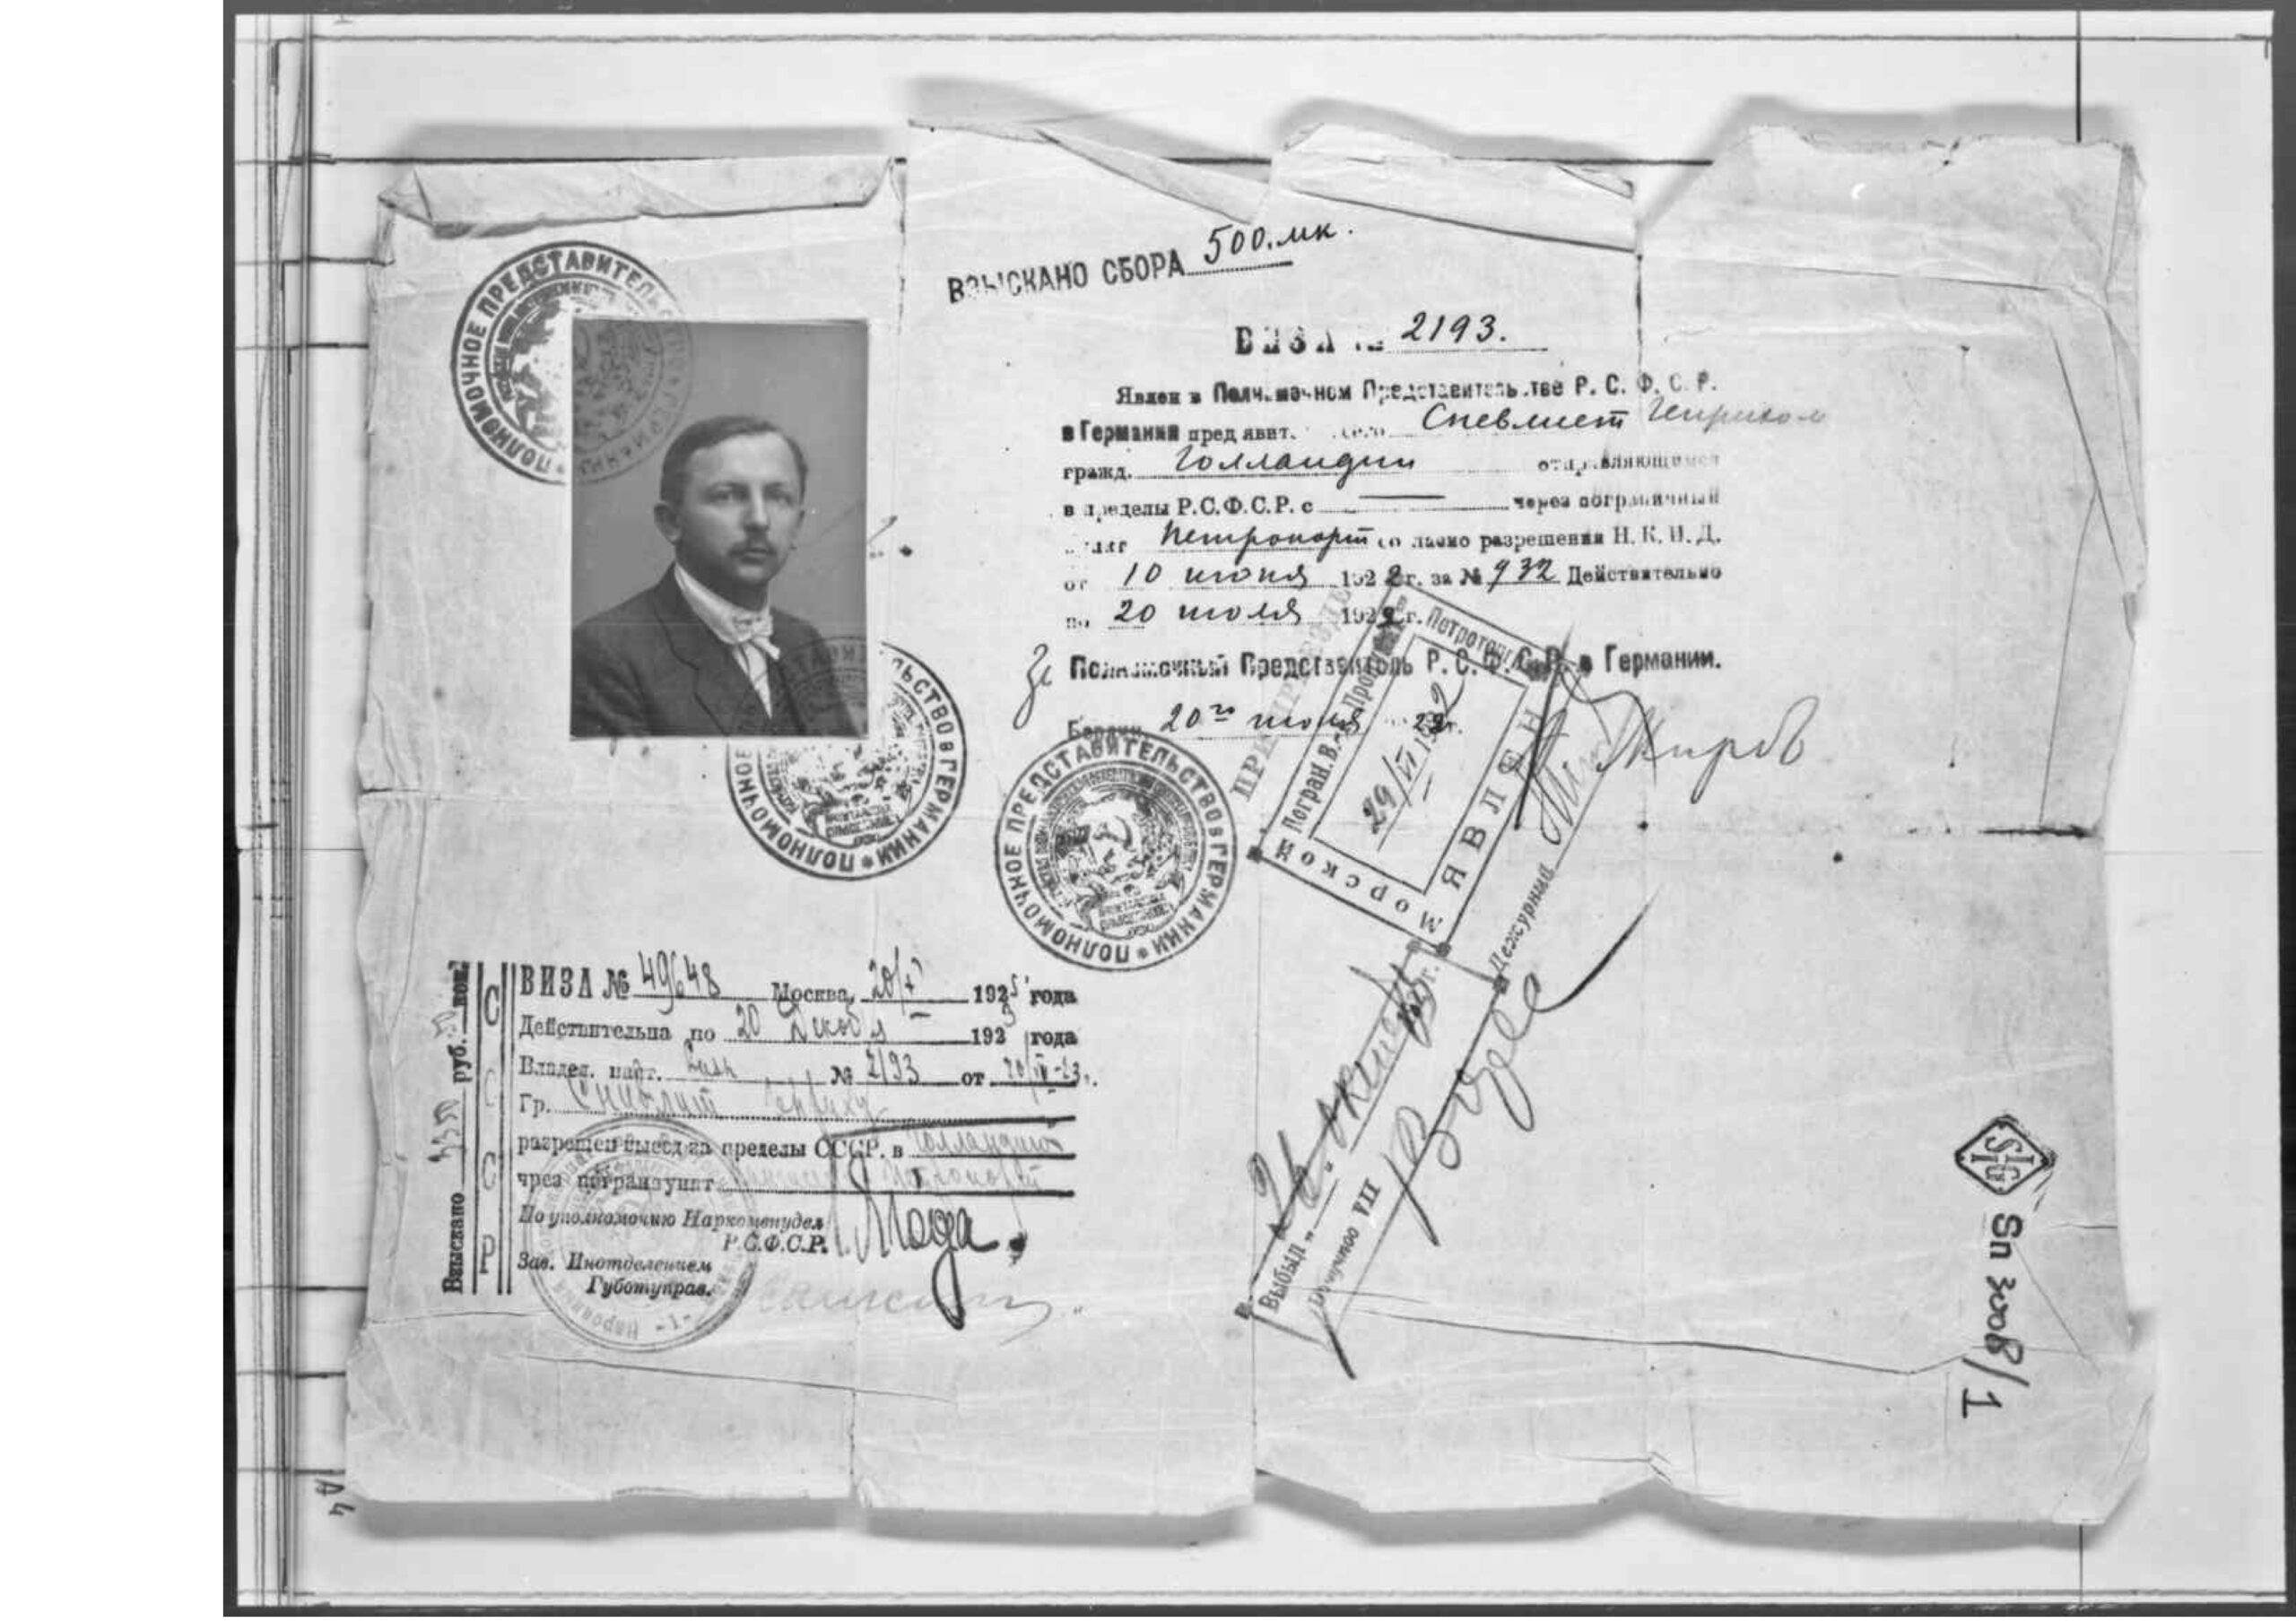 Scan of an old visa featuring a photo in the upper-left corner